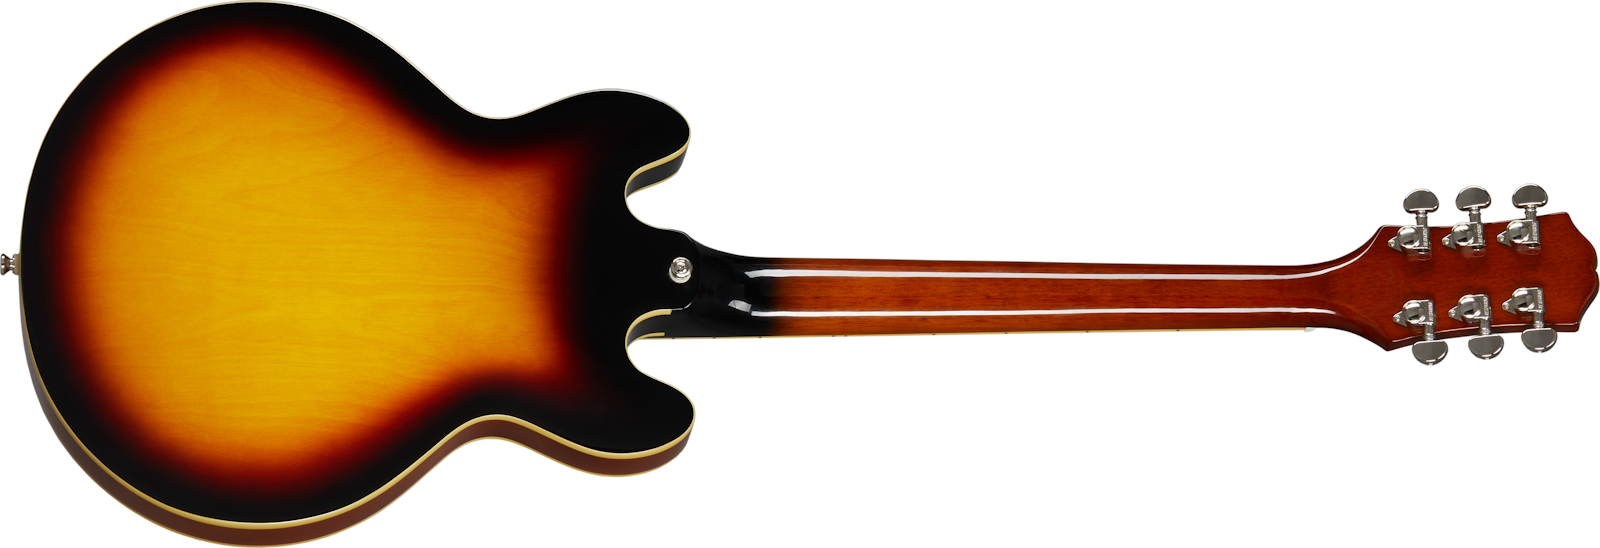 Epiphone Es-339 Inspired By Gibson 2020 2h Ht Rw - Vintage Sunburst - Semi-hollow electric guitar - Variation 1